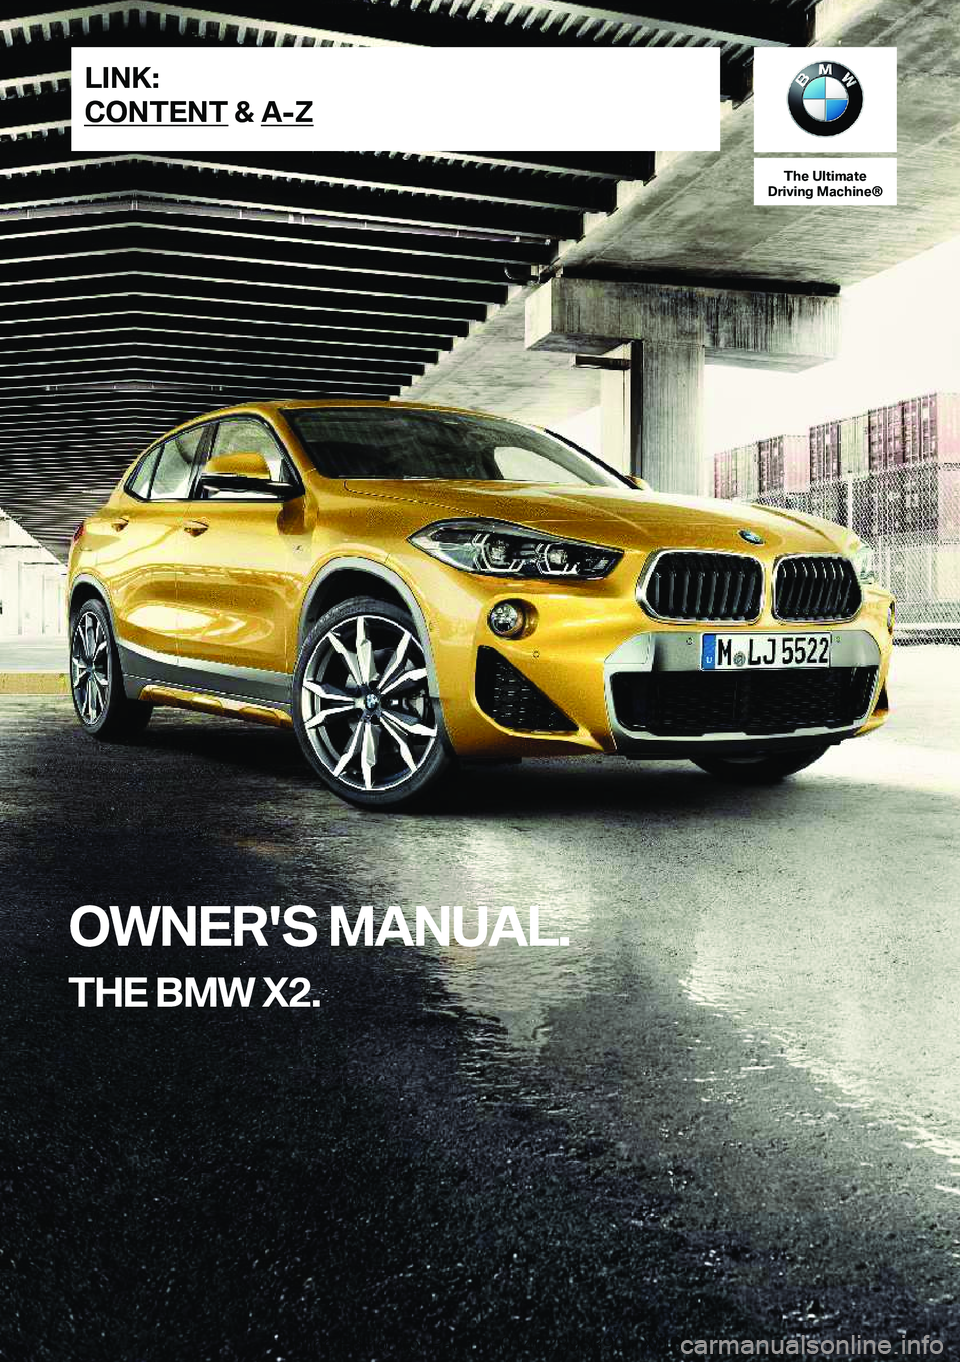 BMW X2 2019  Owners Manual �T�h�e��U�l�t�i�m�a�t�e
�D�r�i�v�i�n�g��M�a�c�h�i�n�e�n
�O�W�N�E�R�'�S��M�A�N�U�A�L�.
�T�H�E��B�M�W��X�2�.�L�I�N�K�:
�C�O�N�T�E�N�T��&��A�-�Z�O�n�l�i�n�e��E�d�i�t�i�o�n��f�o�r��P�a�r�t�